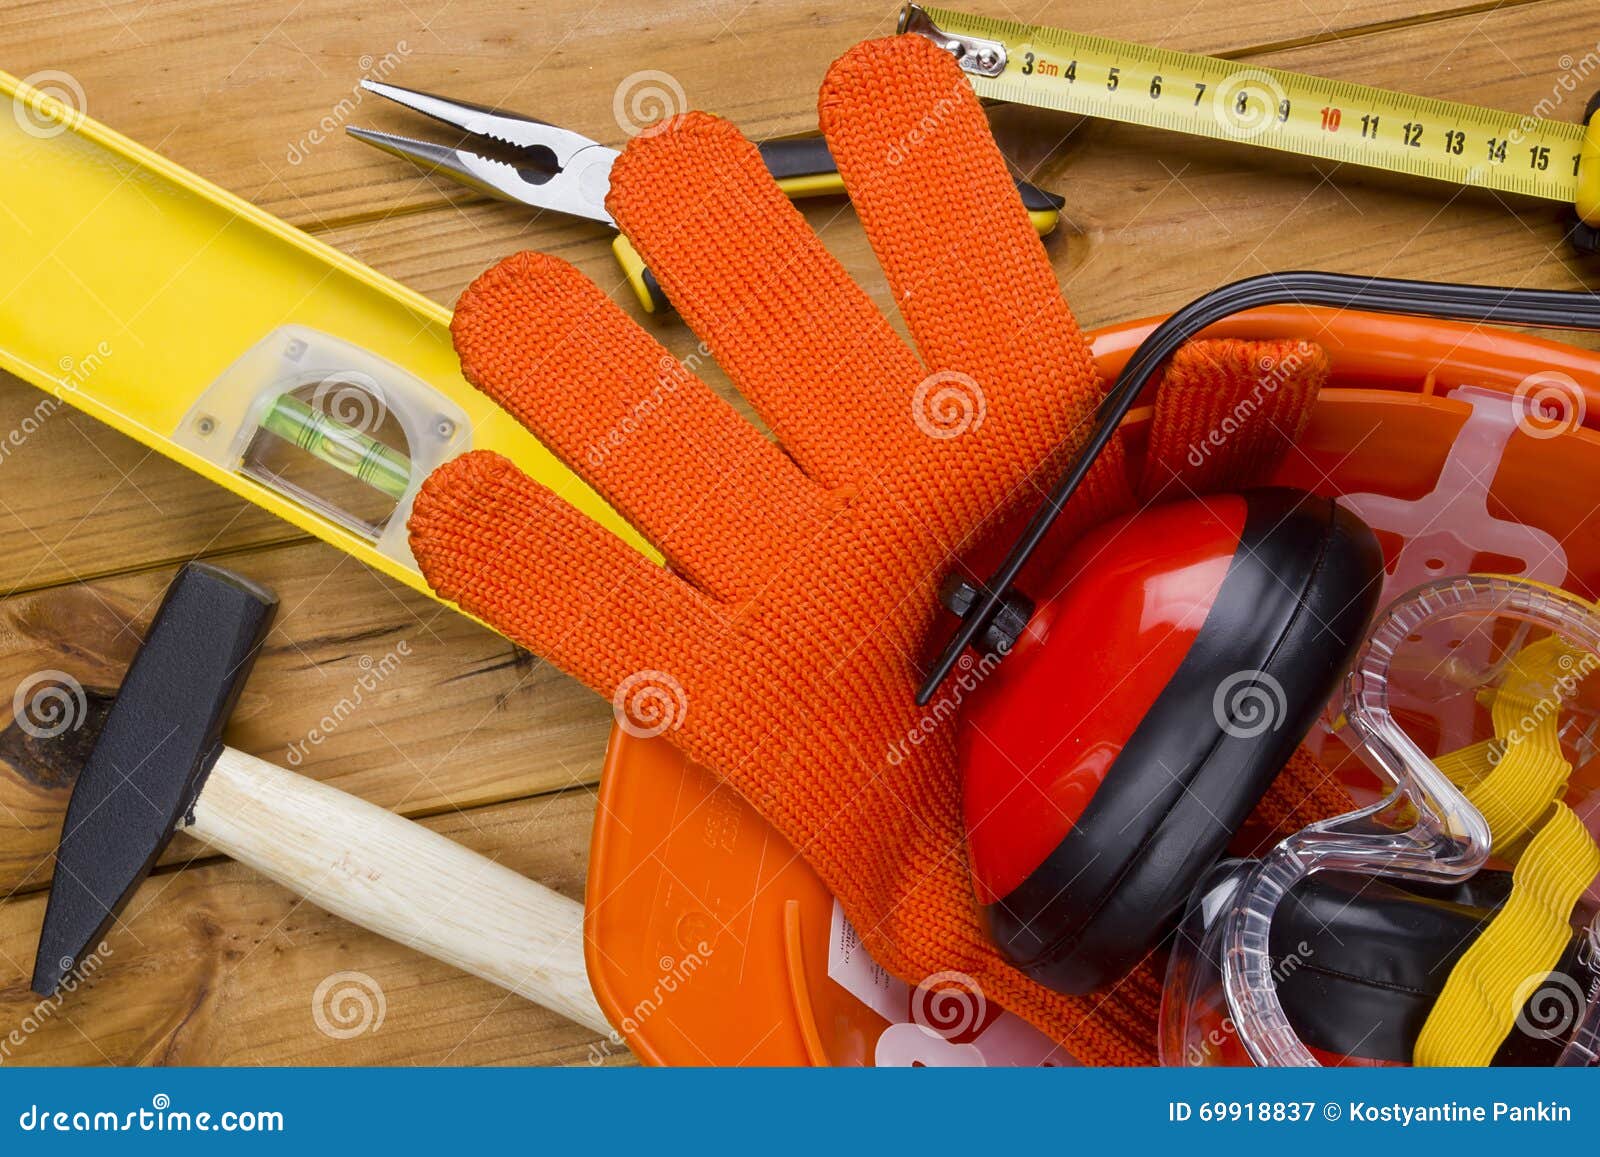 building tools and materials